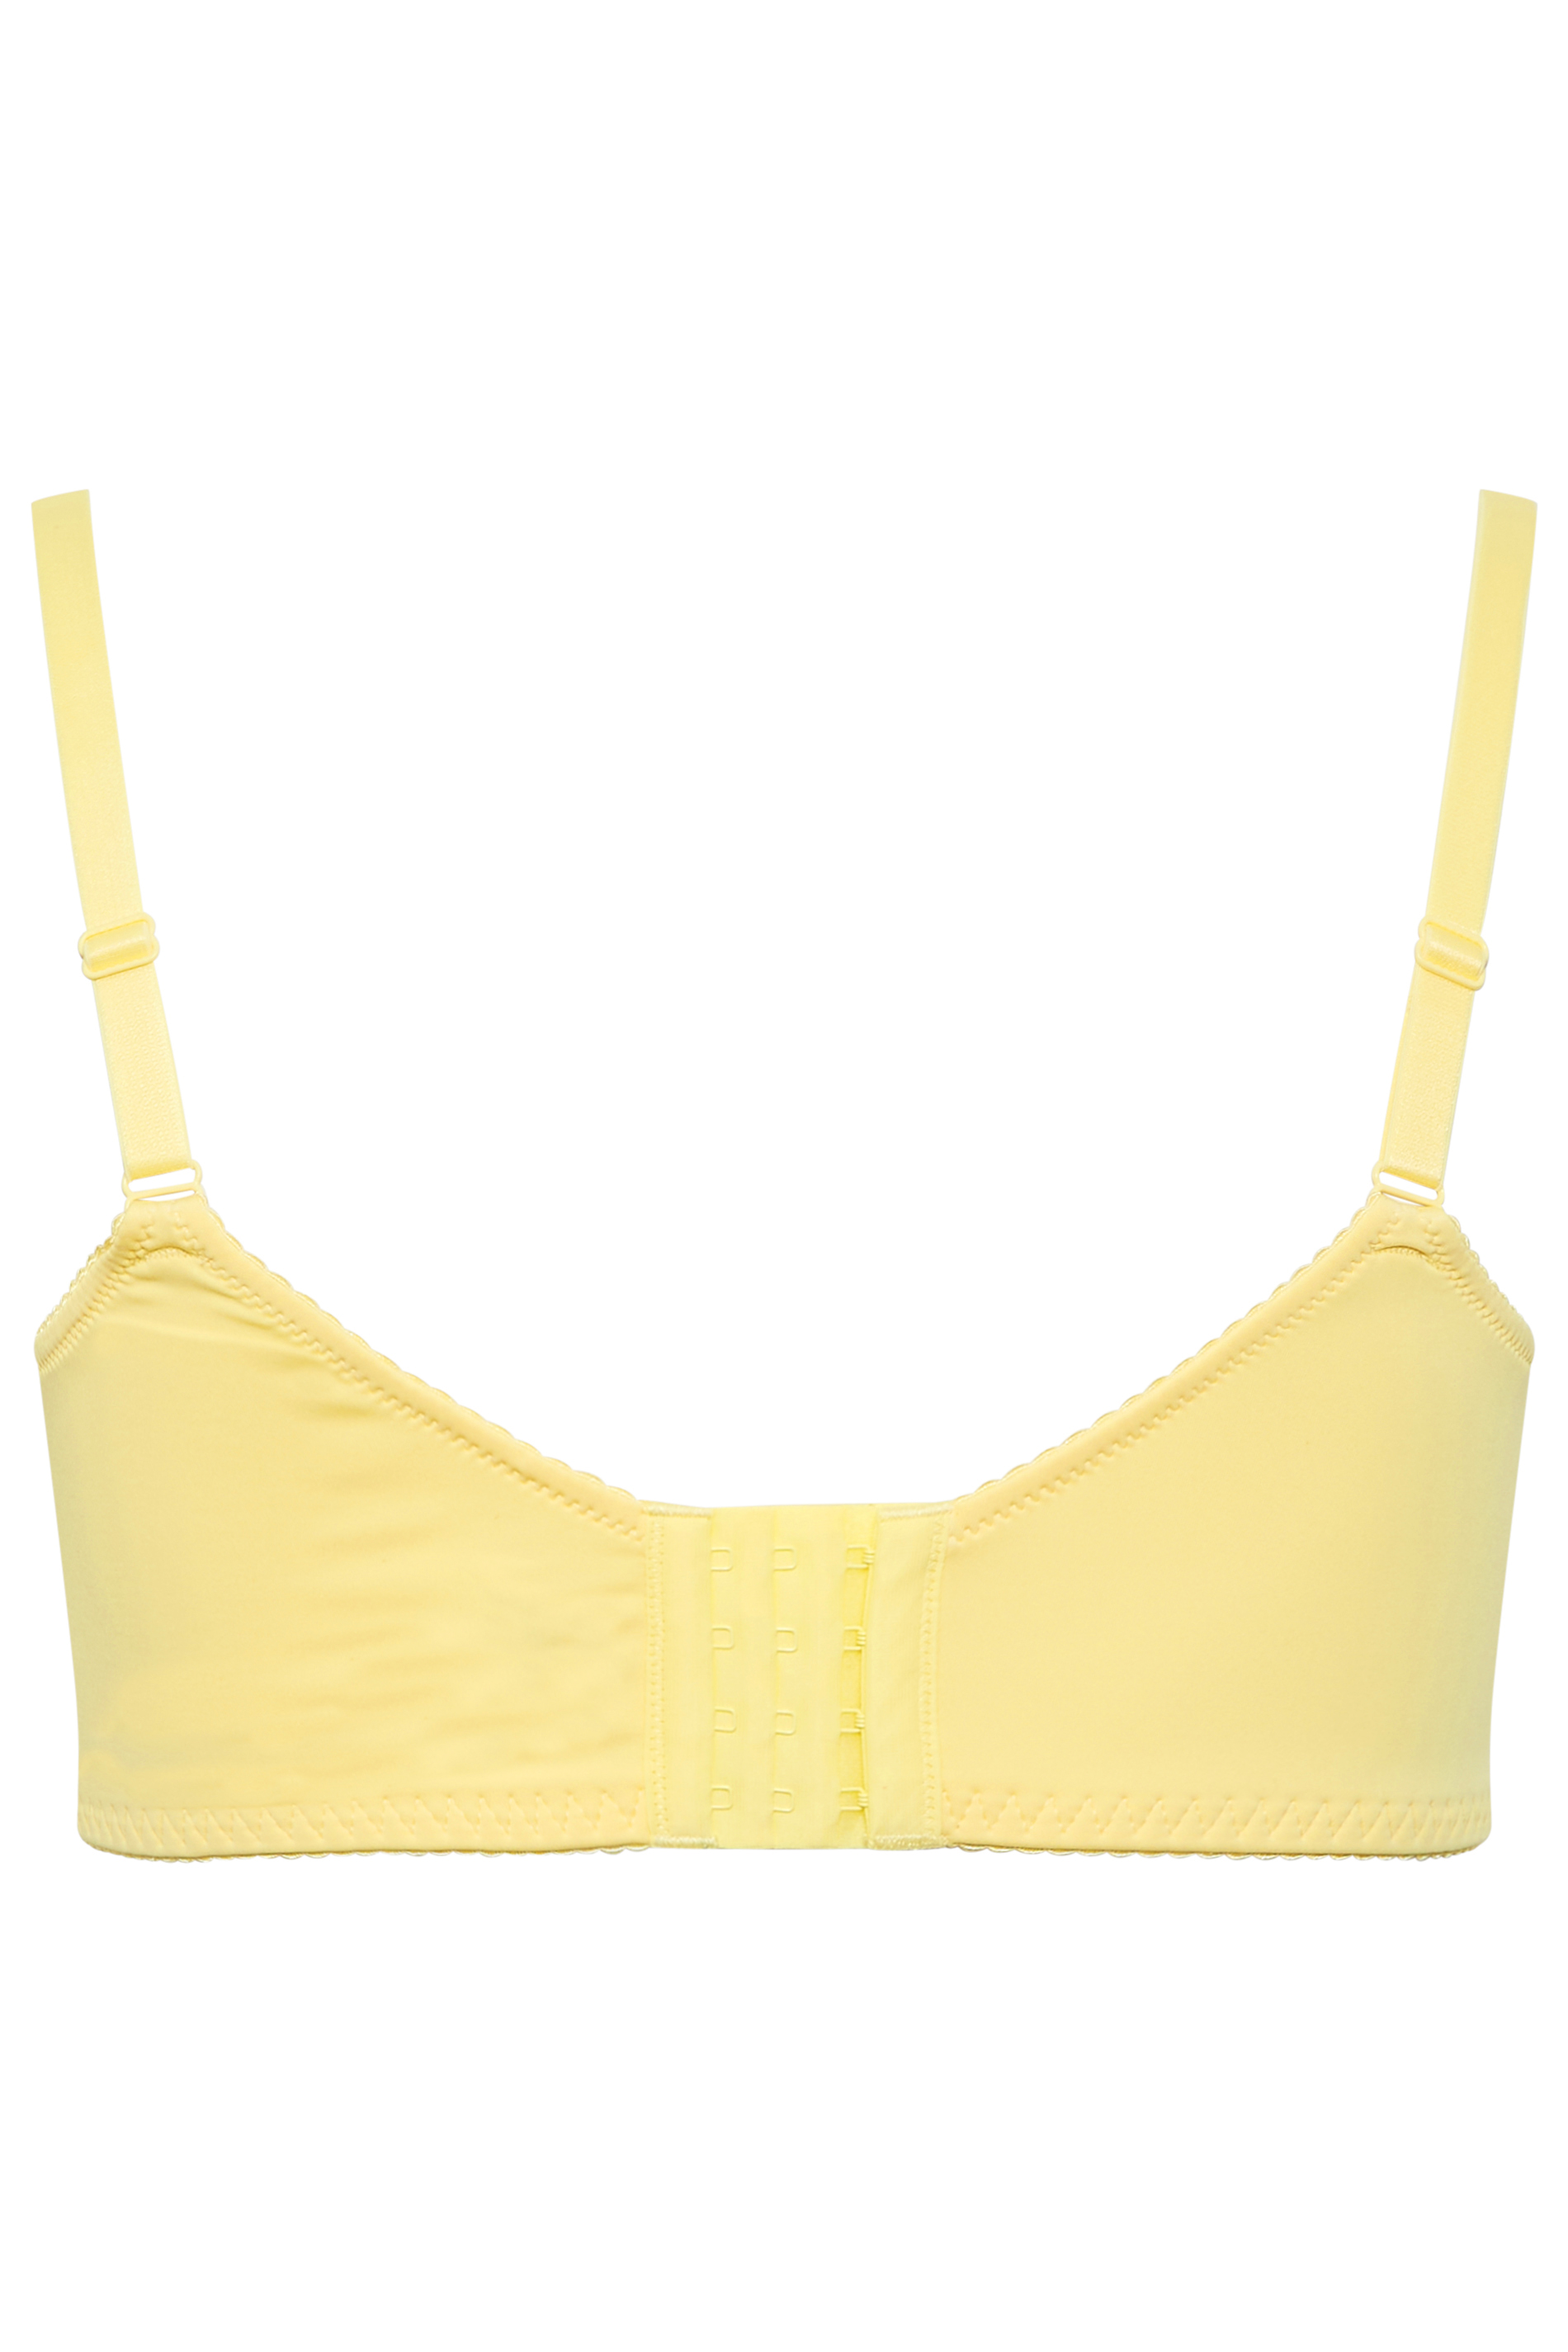 21001-4 Women's Yellow Non-padded Underwired Full Cup Bra